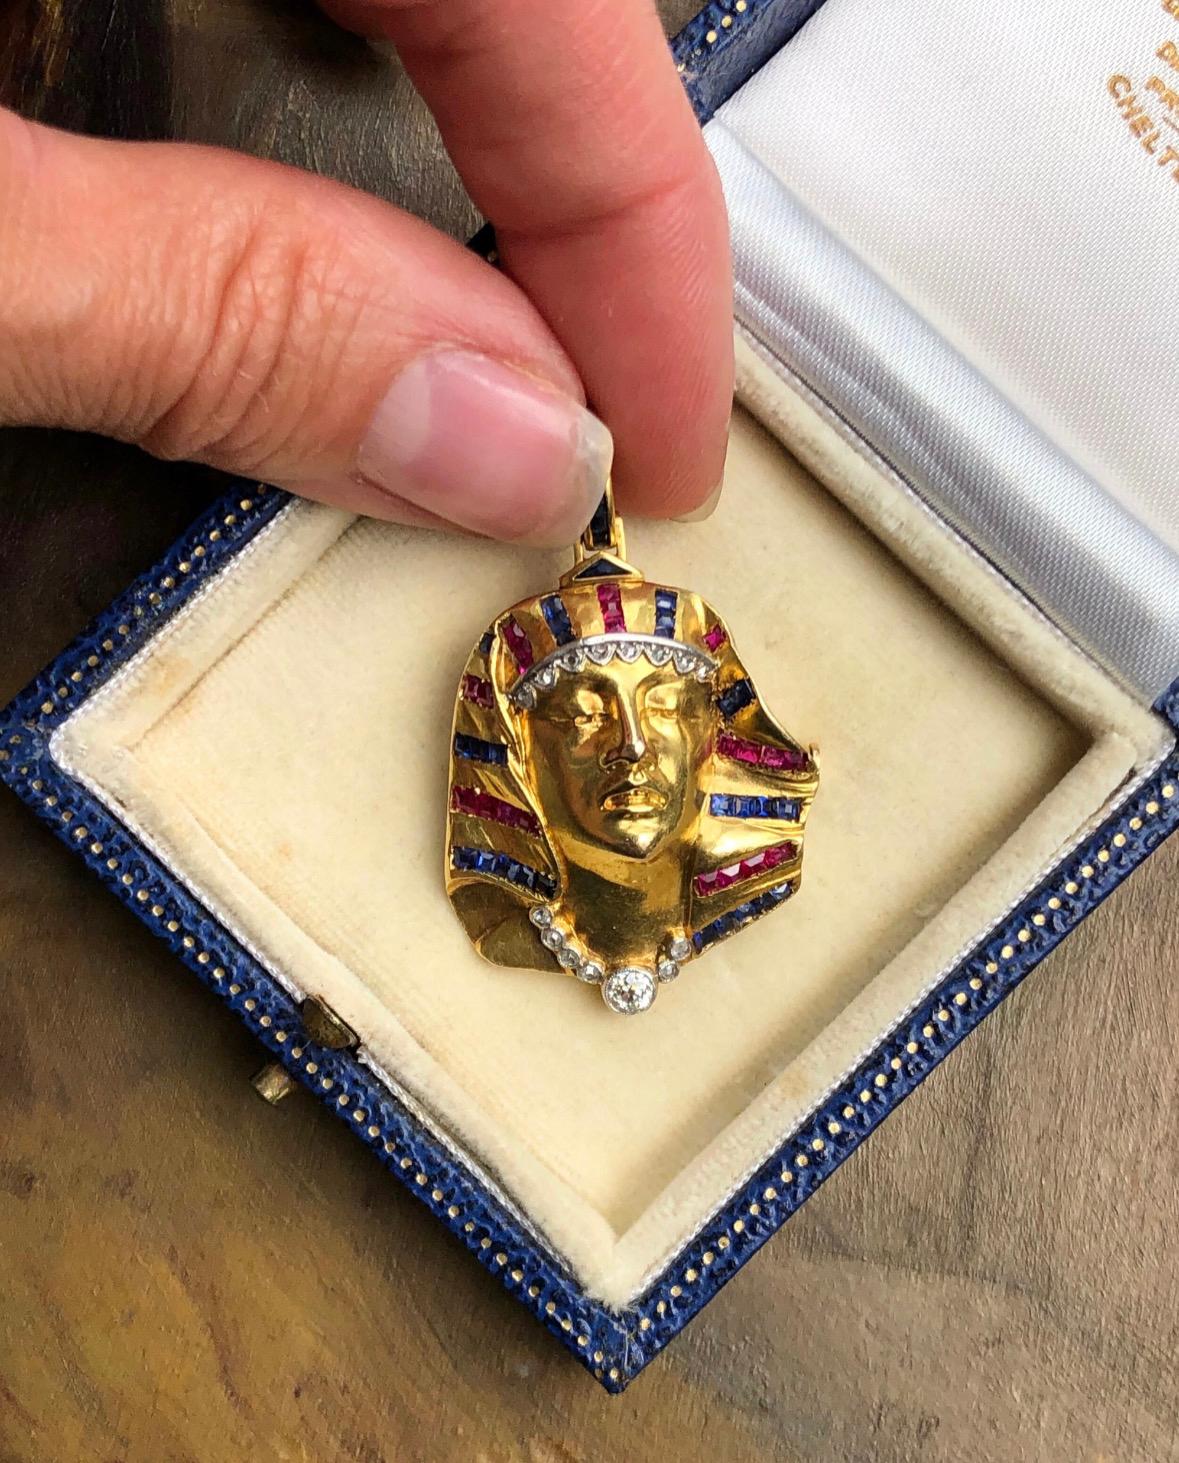 Egyptian revival jewelry became wildly popular during the Art Deco period after King Tut’s tomb was opened in 1922. This French 18k gold pharaoh is finely hand detailed and depicted wearing a diamond necklace and a diamond fringed nemes with